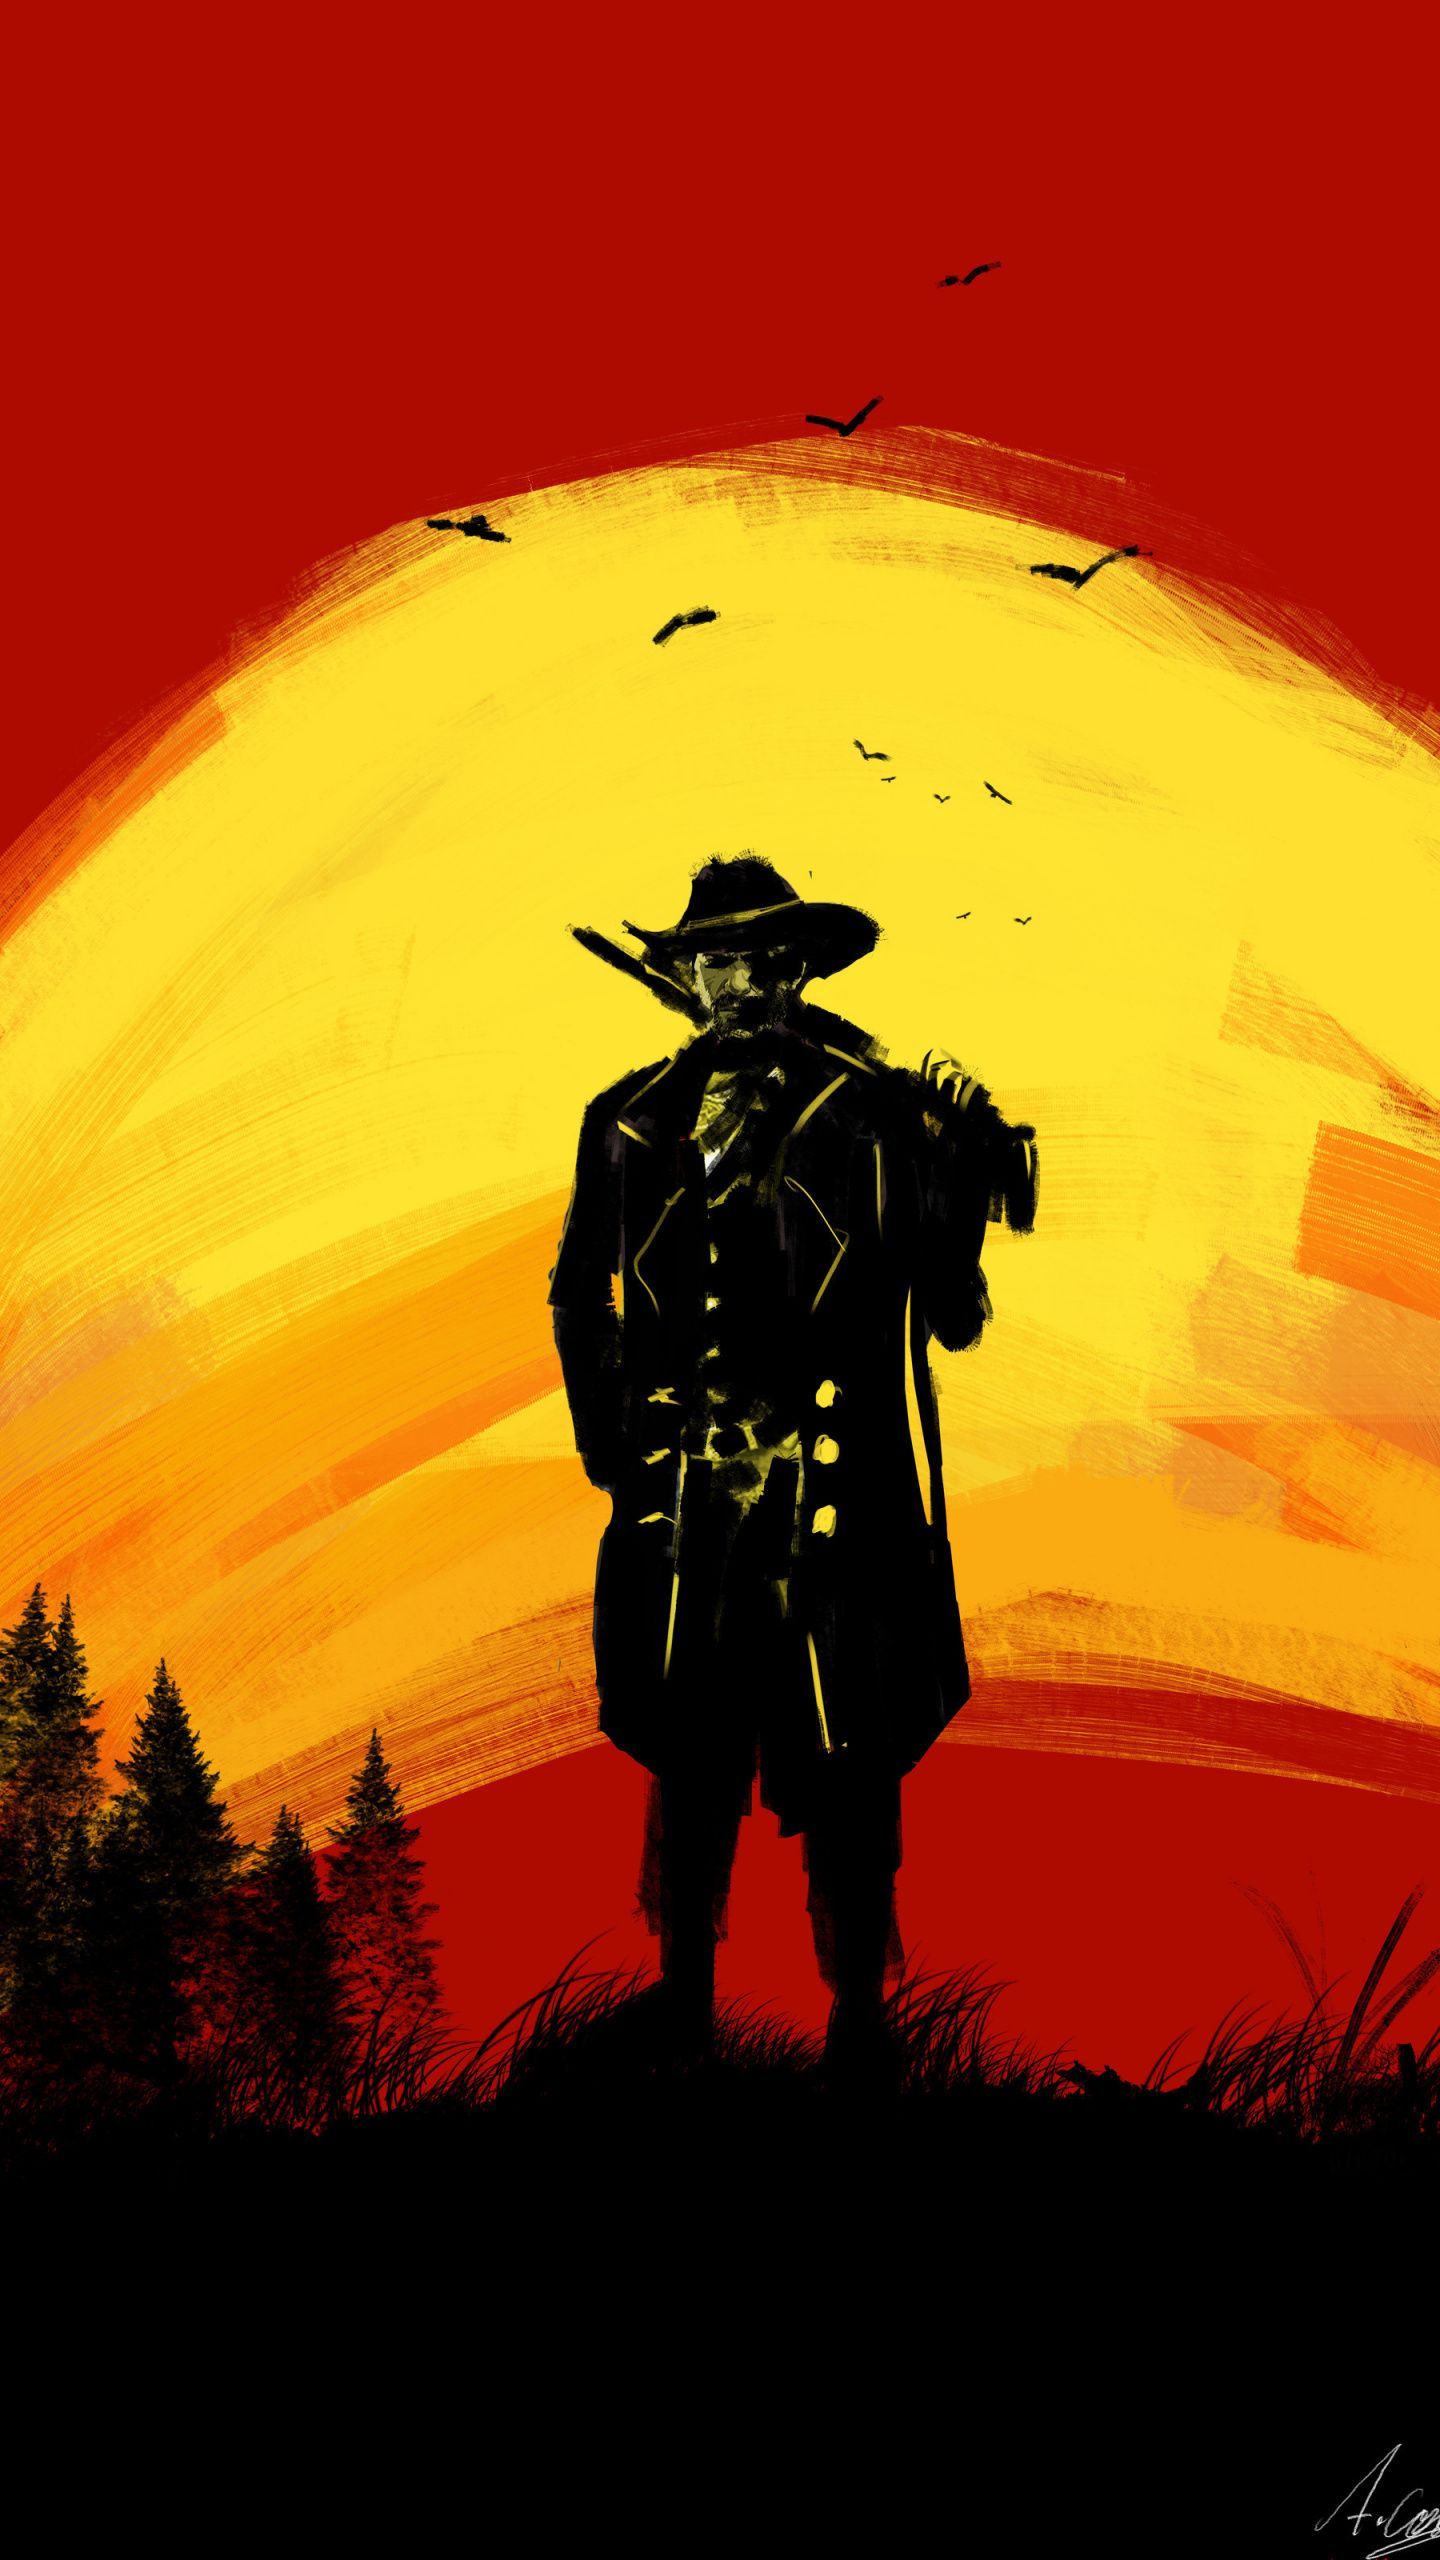 Wallpaper background, the game, Red Dead Redemption II for mobile